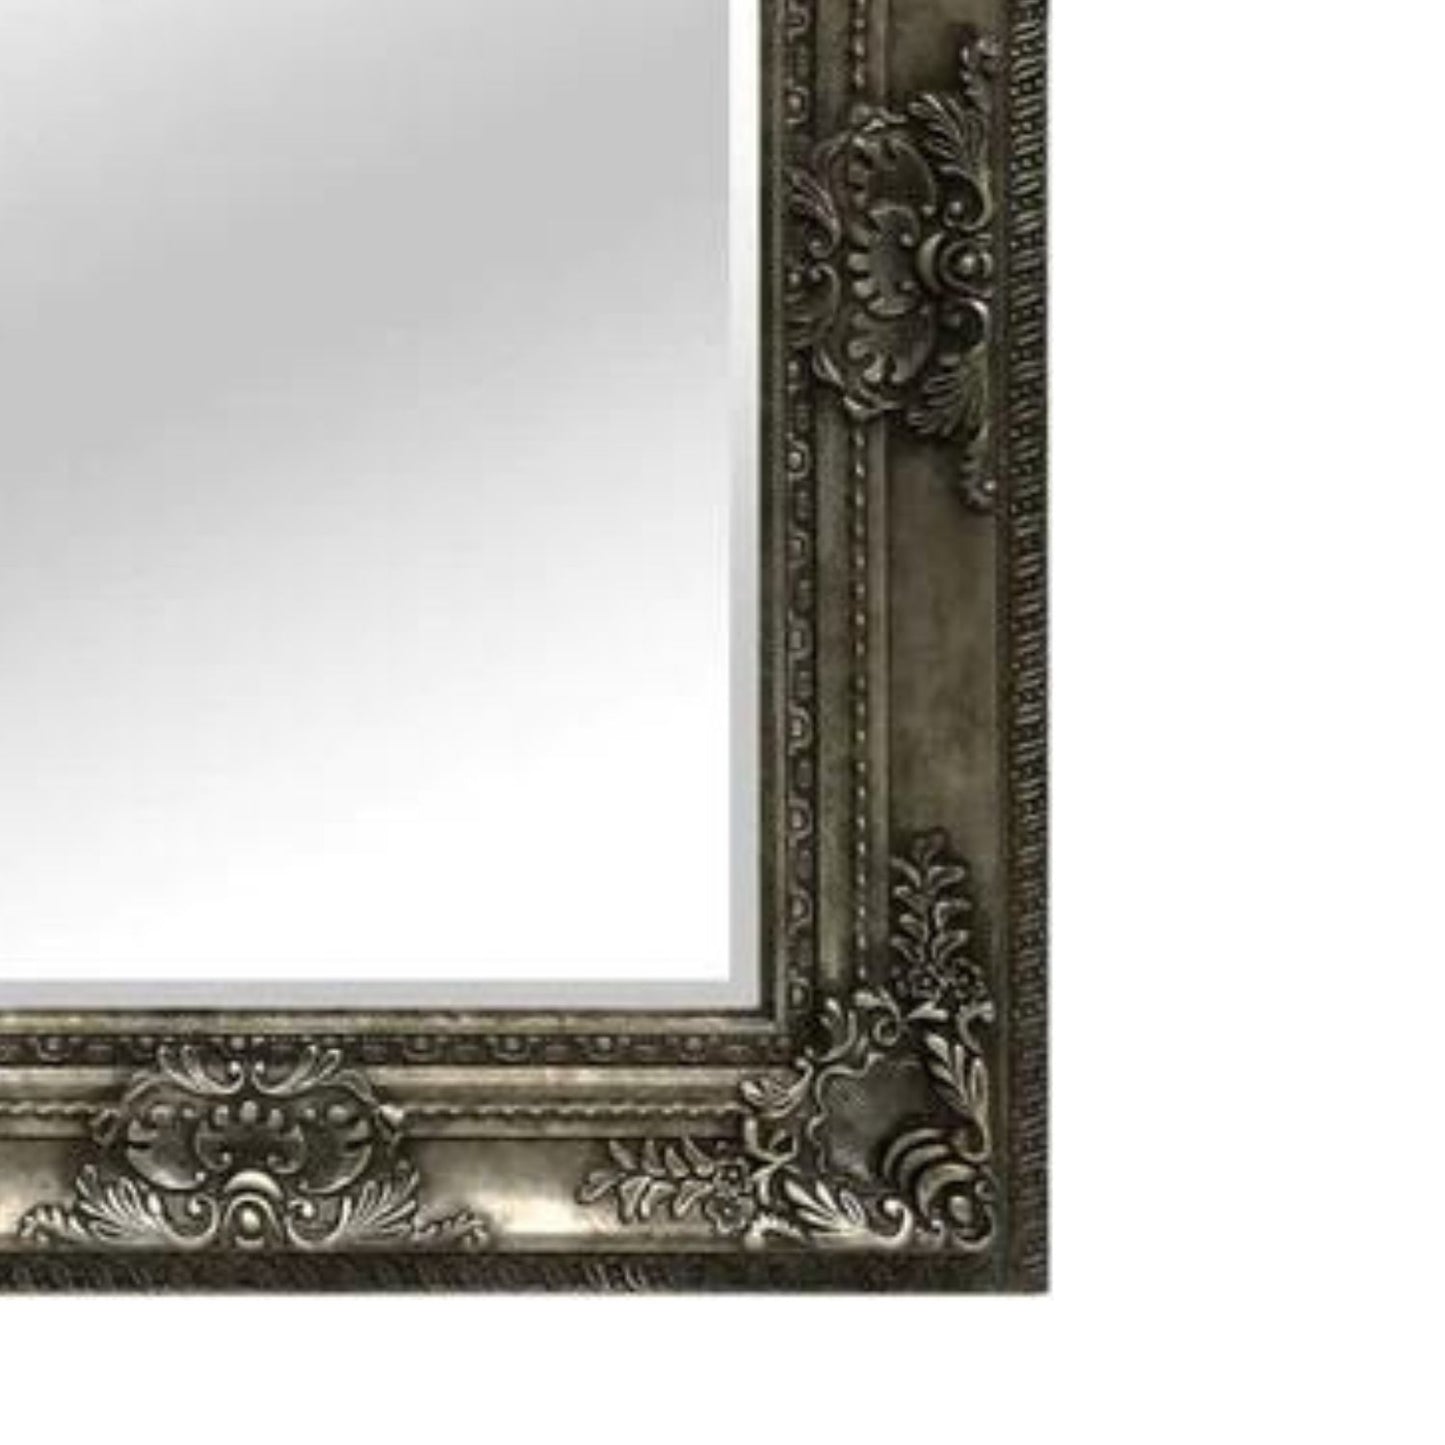 Silver Leaner mirror with regal opulent design